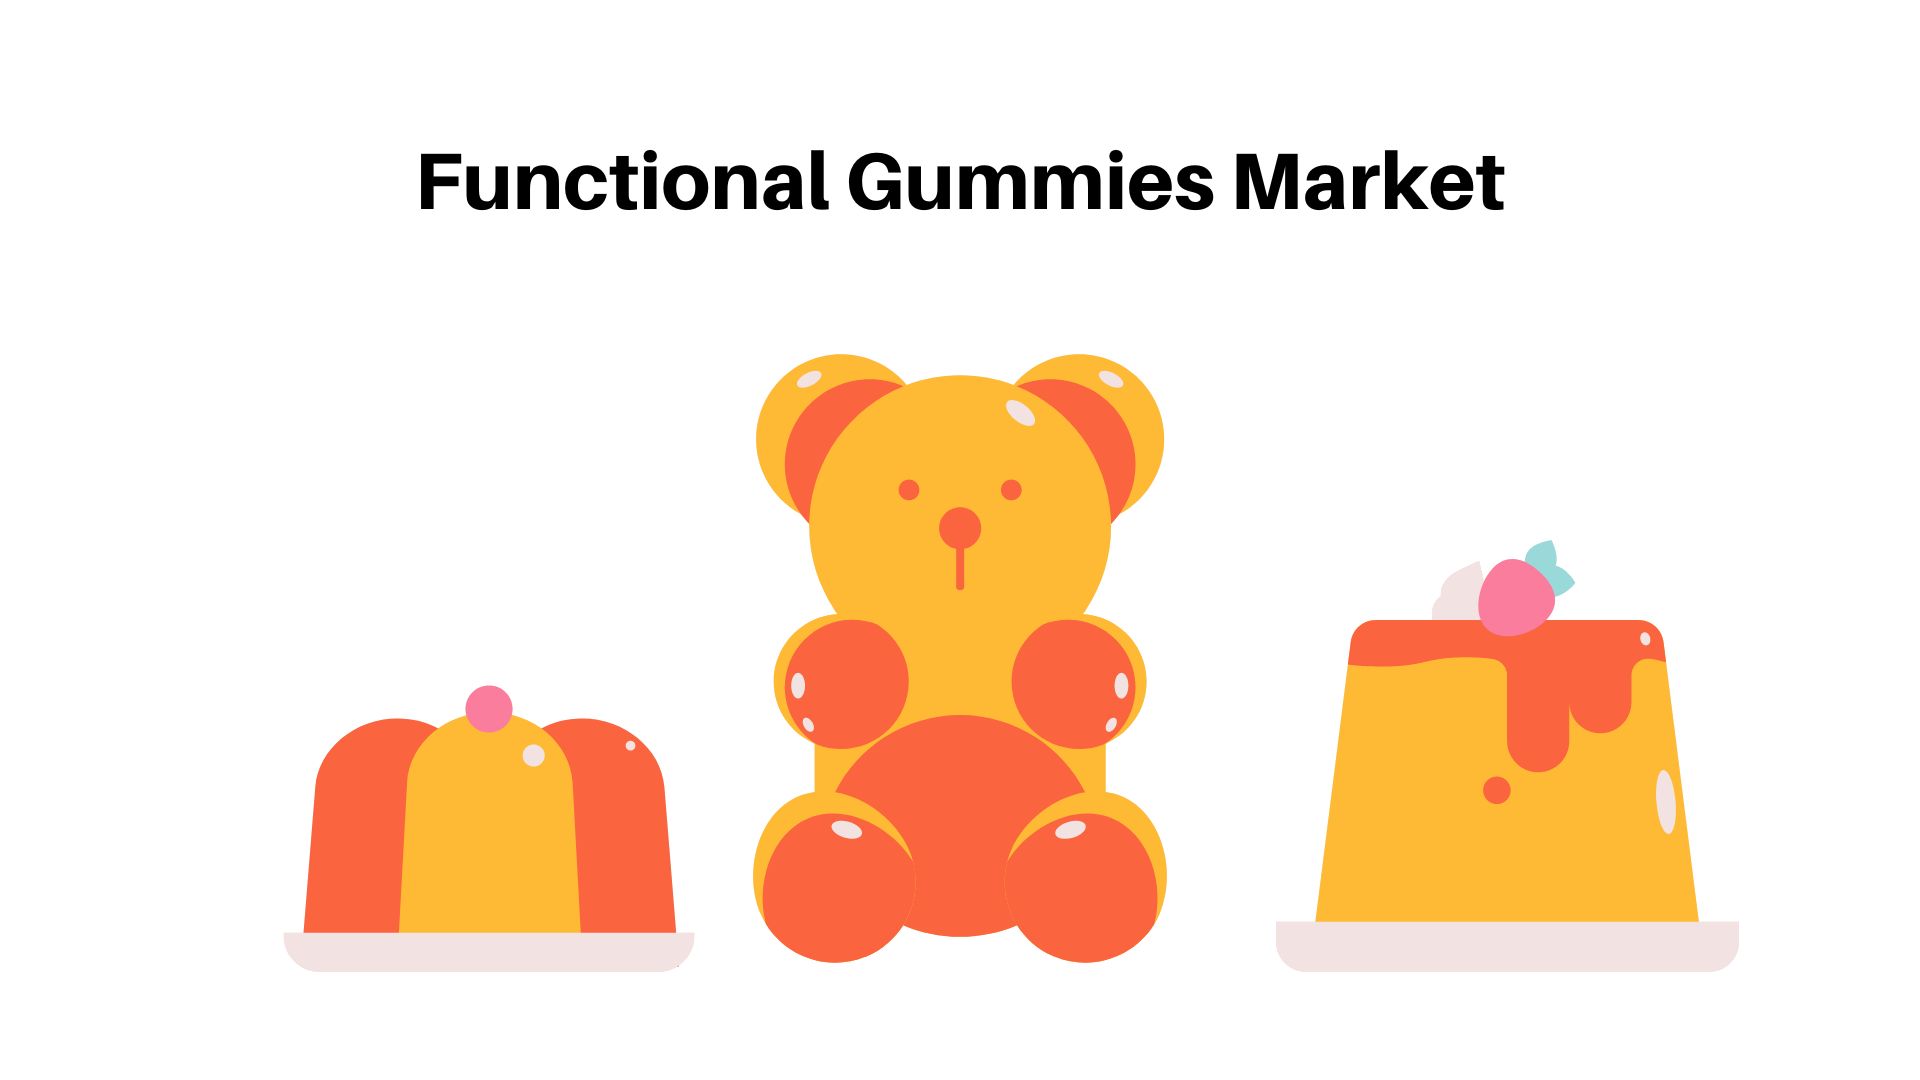 Functional Gummies Market is expected to grow at a significant CAGR of 11.7%